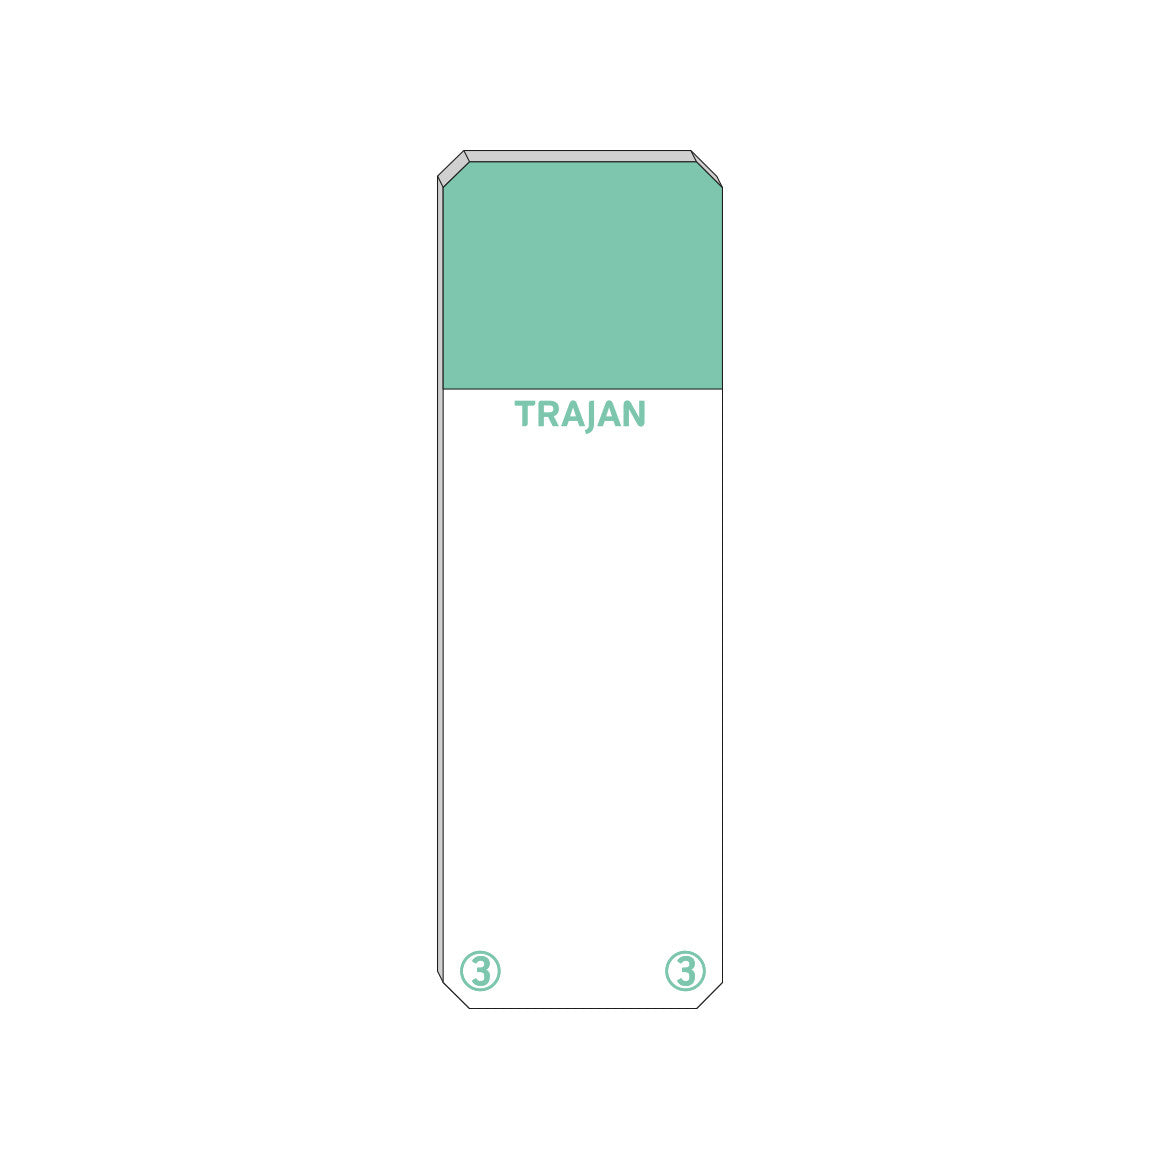 Trajan Scientific and Medical, Series 3 Adhesive Microscope Slides, Green, Frost 20 mm, 76 mm x 26 mm